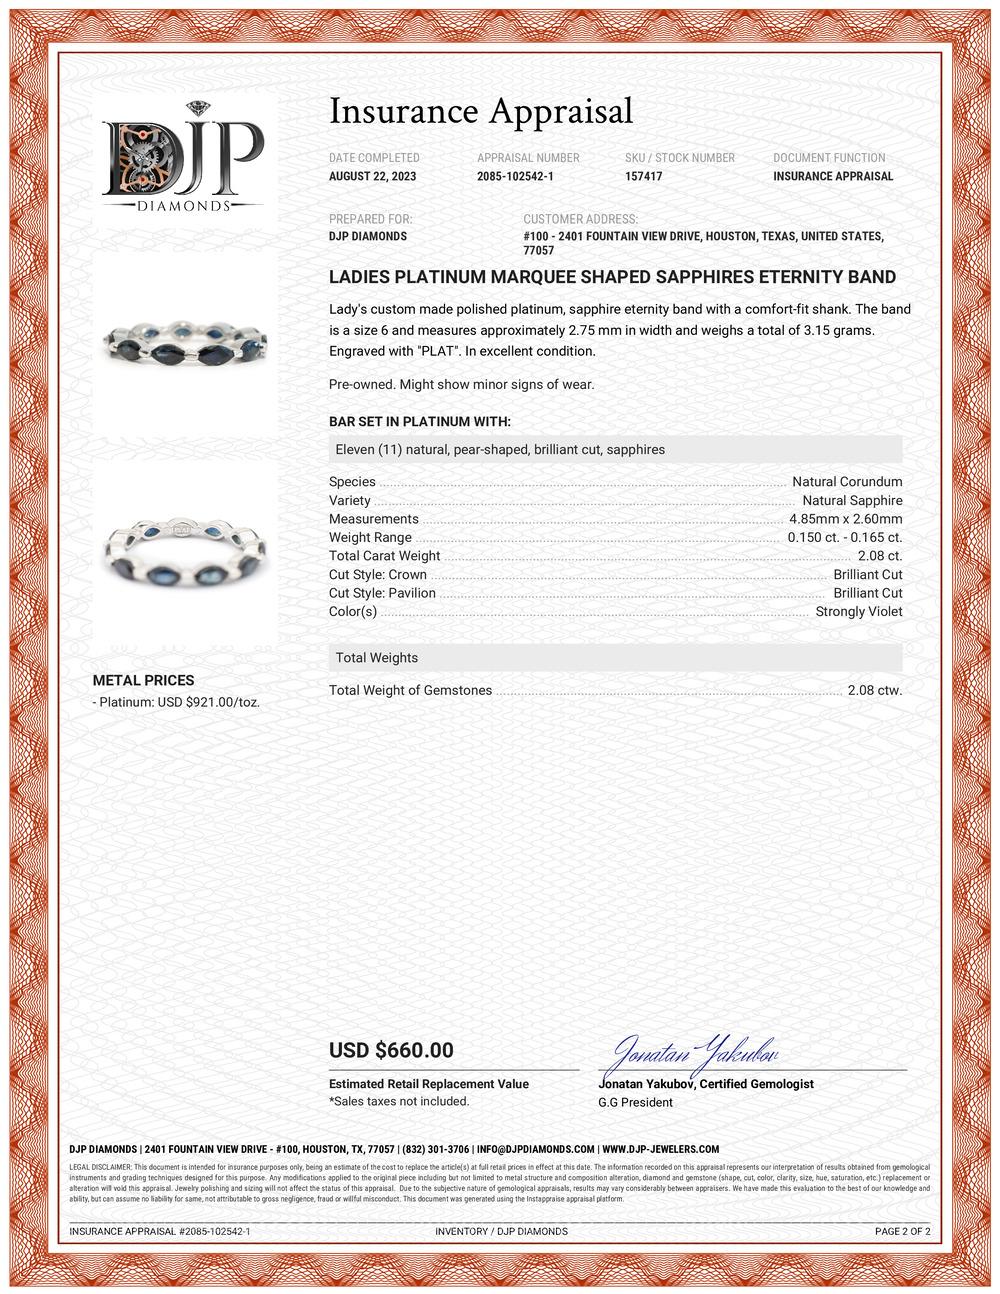 Ladies Platinum Marquee Shaped Sapphires Eternity Band 3